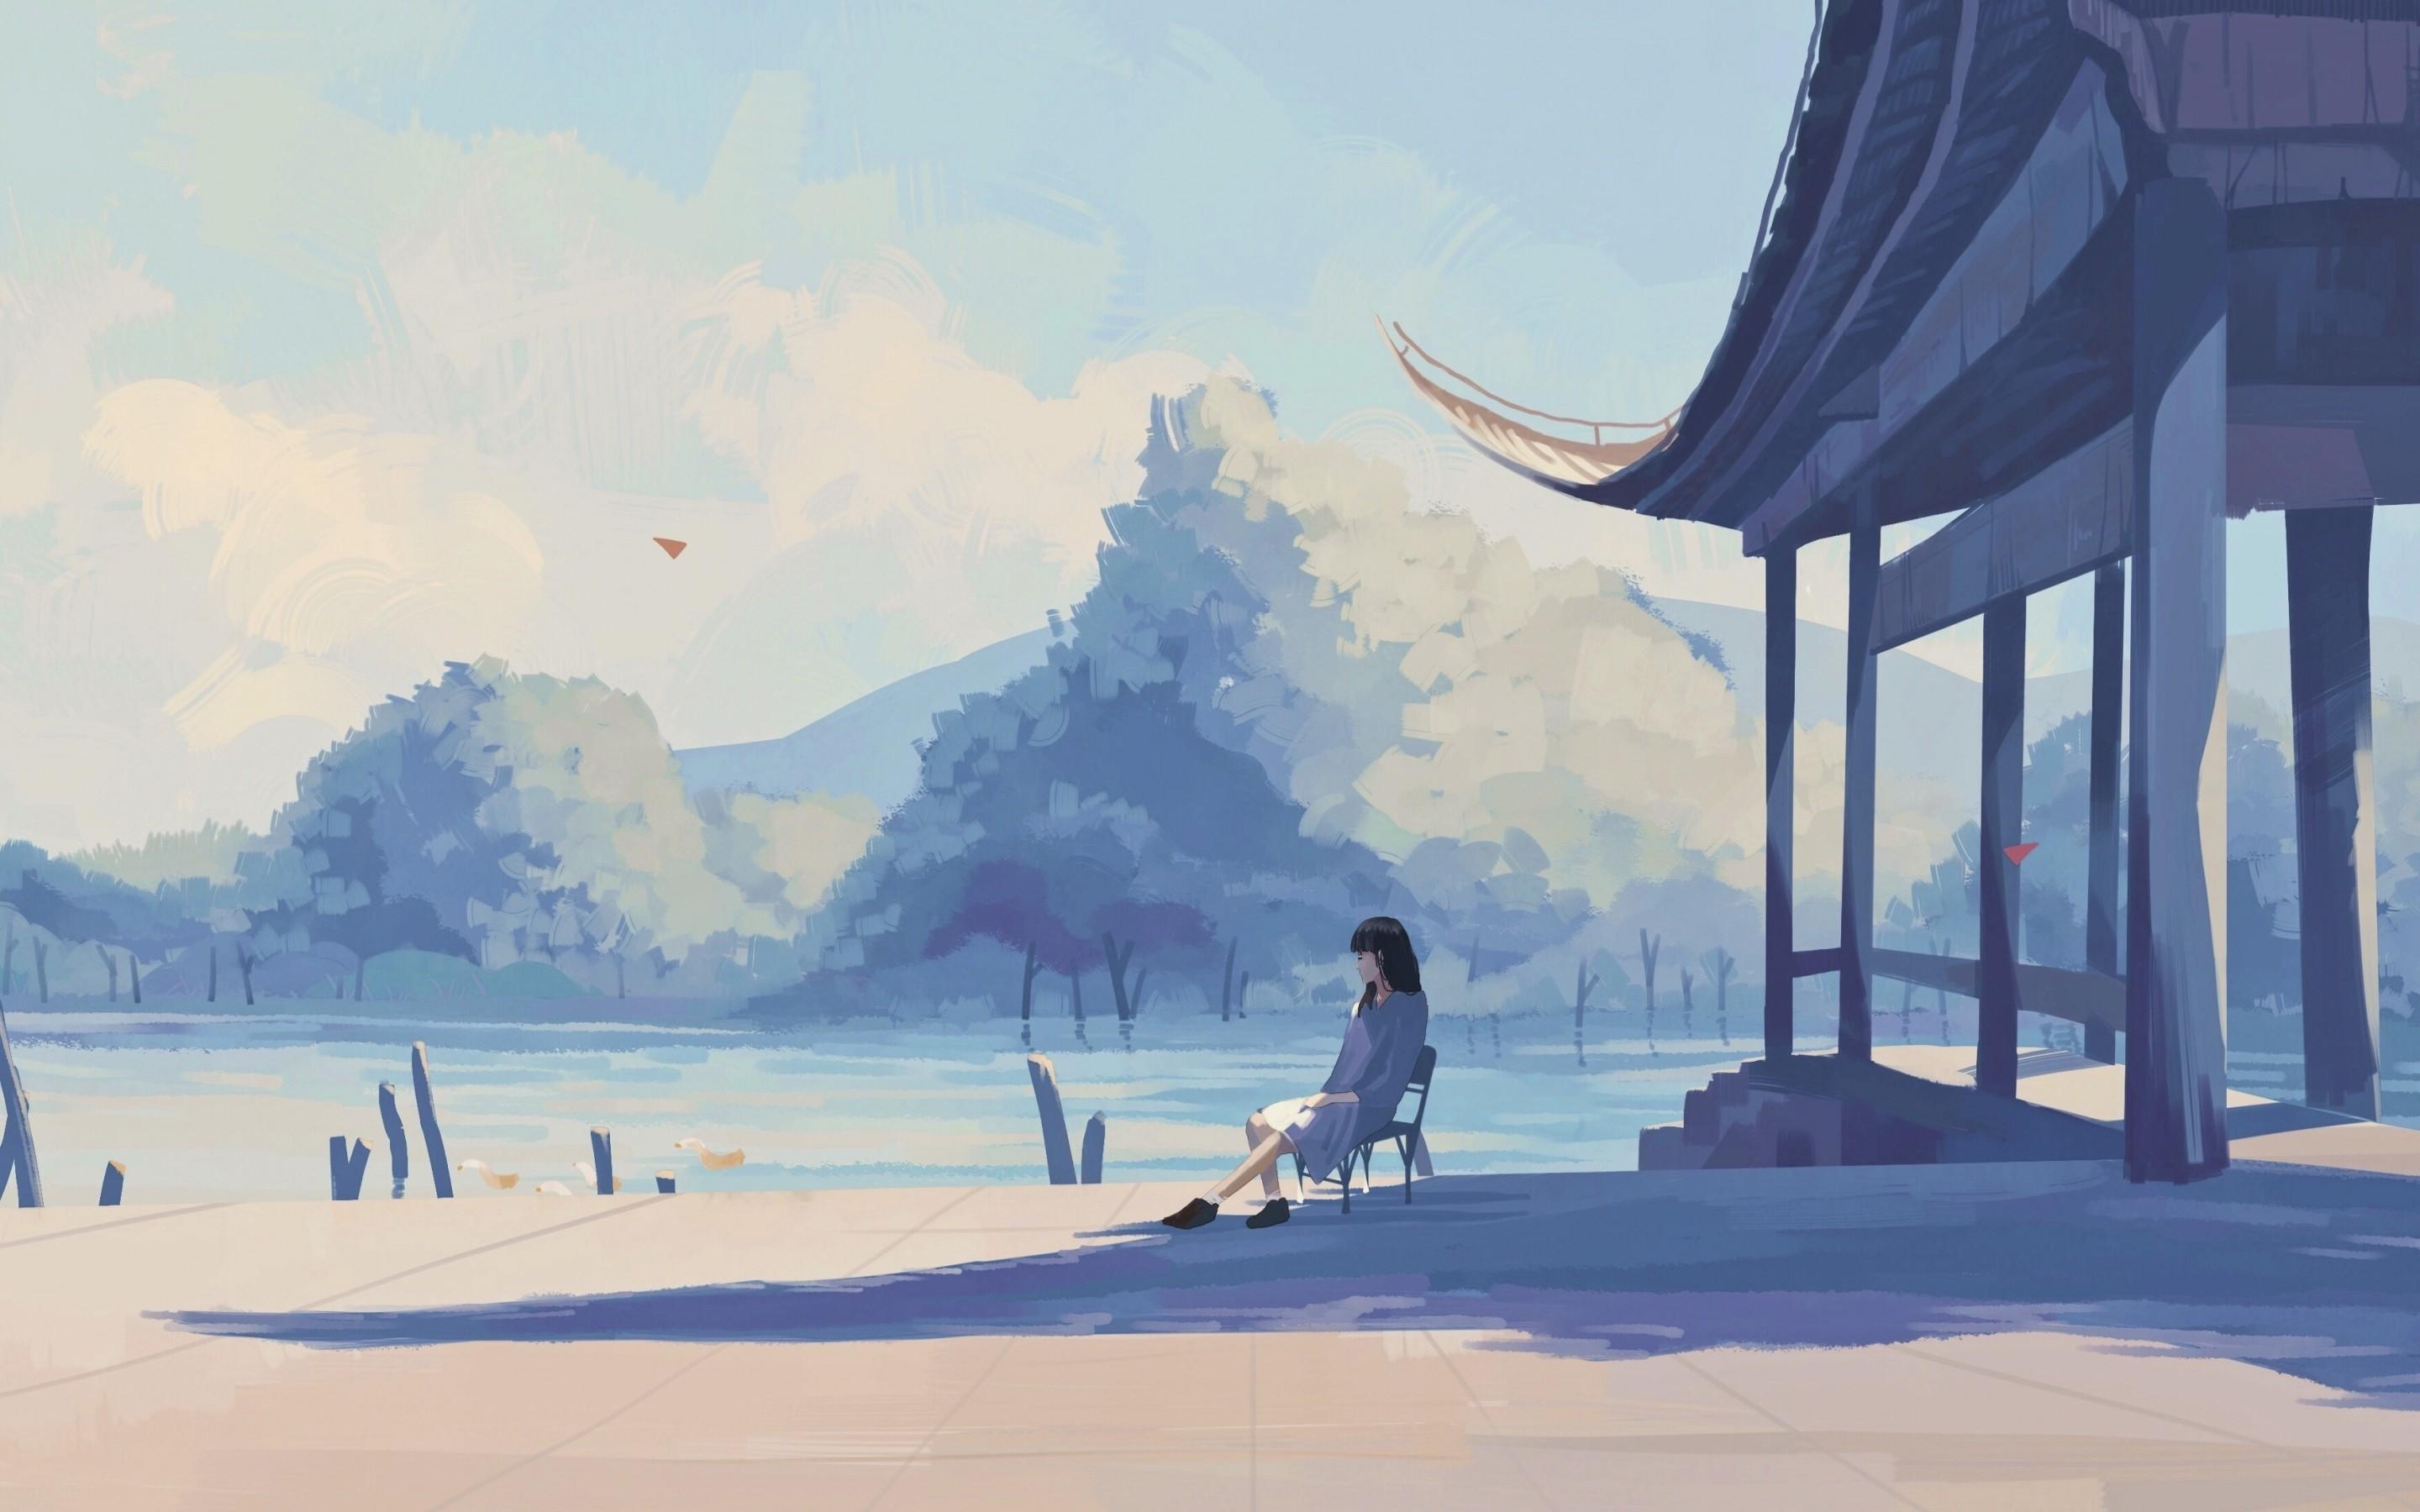 Download 2880x1800 Lonely Anime Girl, Lake, Pastel Colors, Shadow.